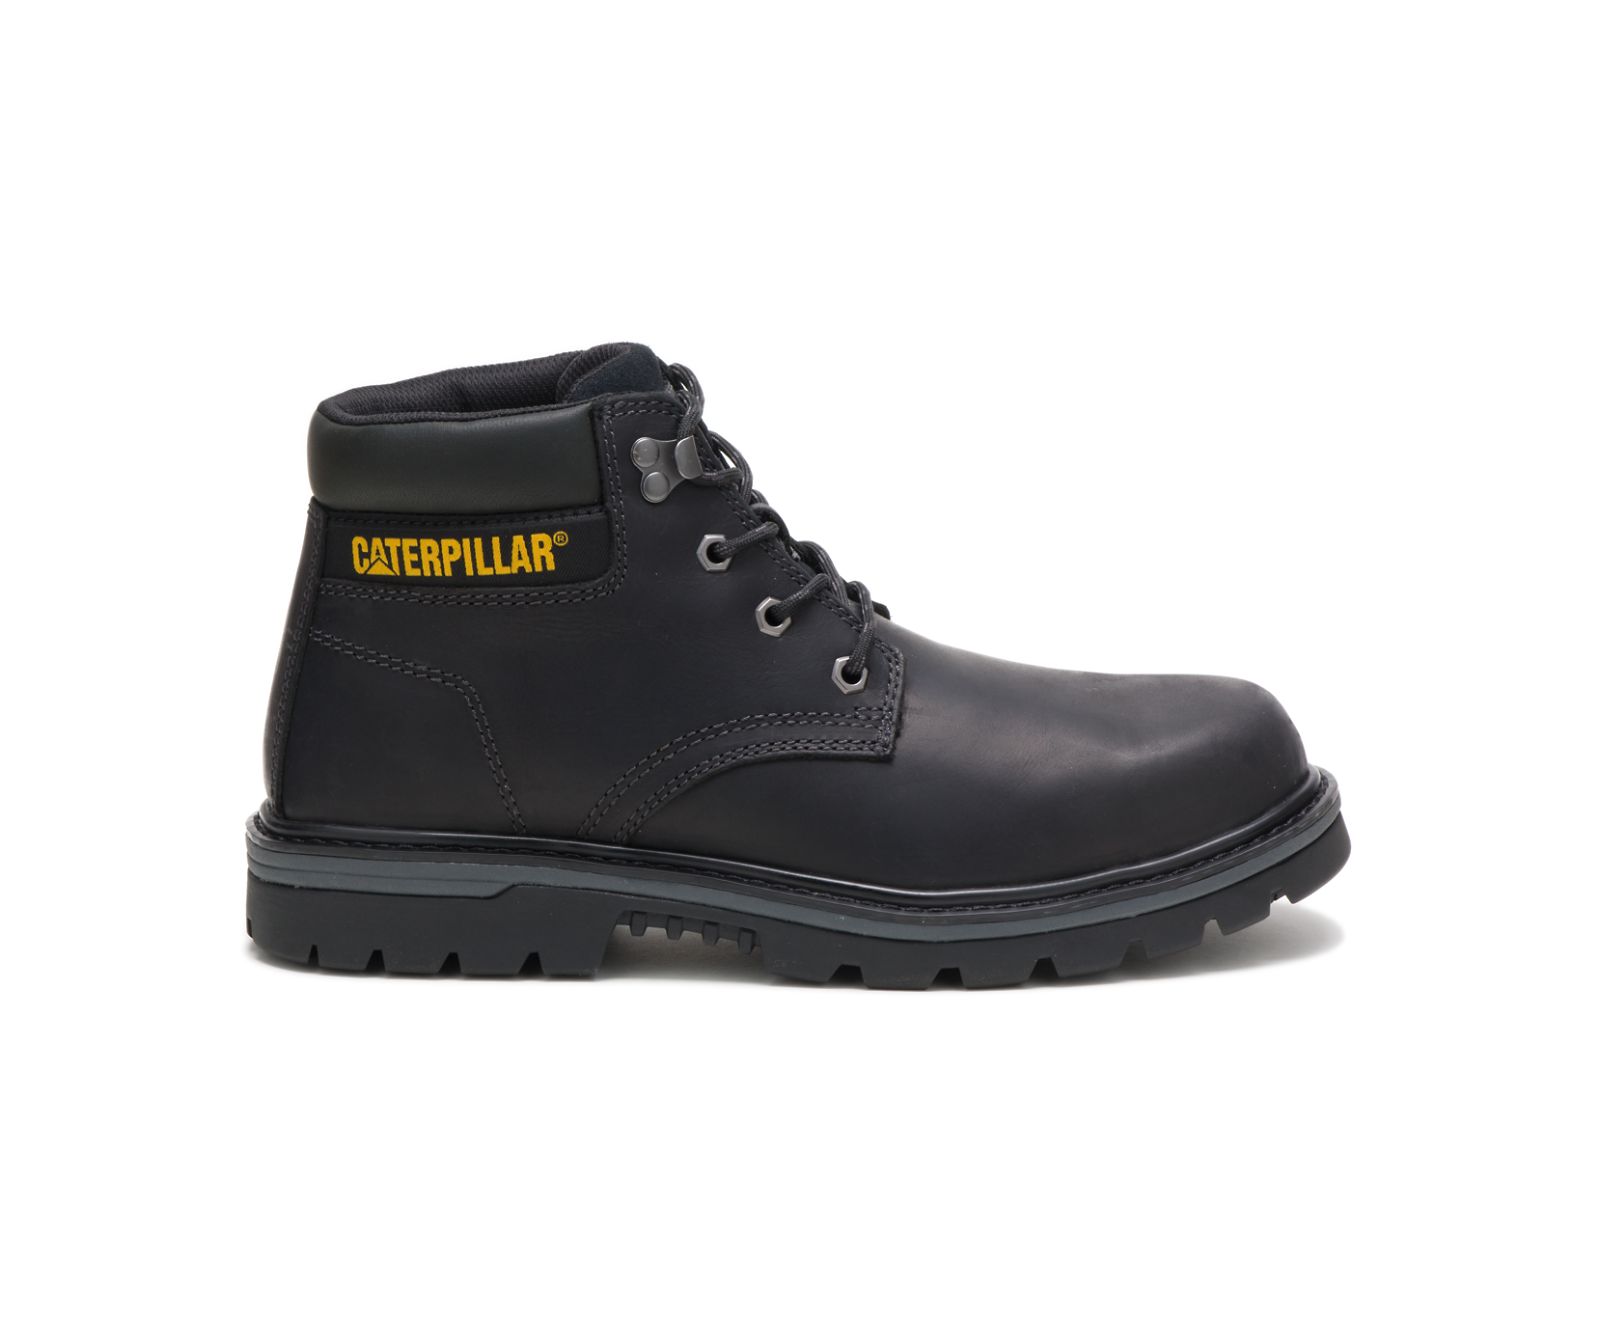 Outbase Steel Toe Work Boots